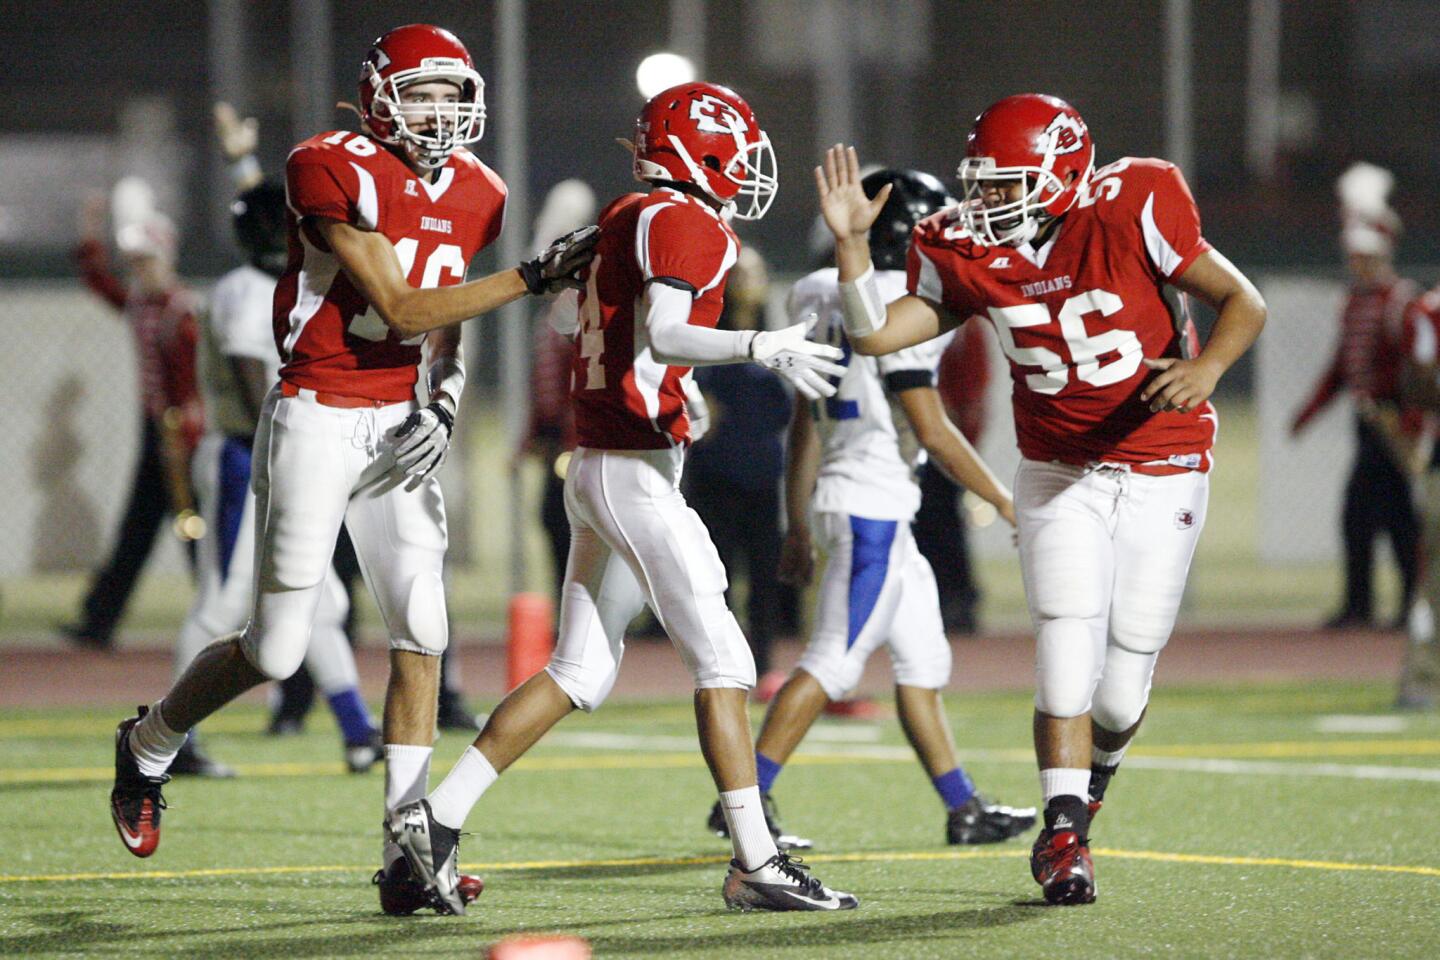 Burroughs' Conor Joyce, from left, Jonathan Fuentes and Victor Mora give each other high fives after Fuentes makes a touchdown during a game against North Hollywood at John Burroughs High School in Burbank on Friday, September 7, 2012.